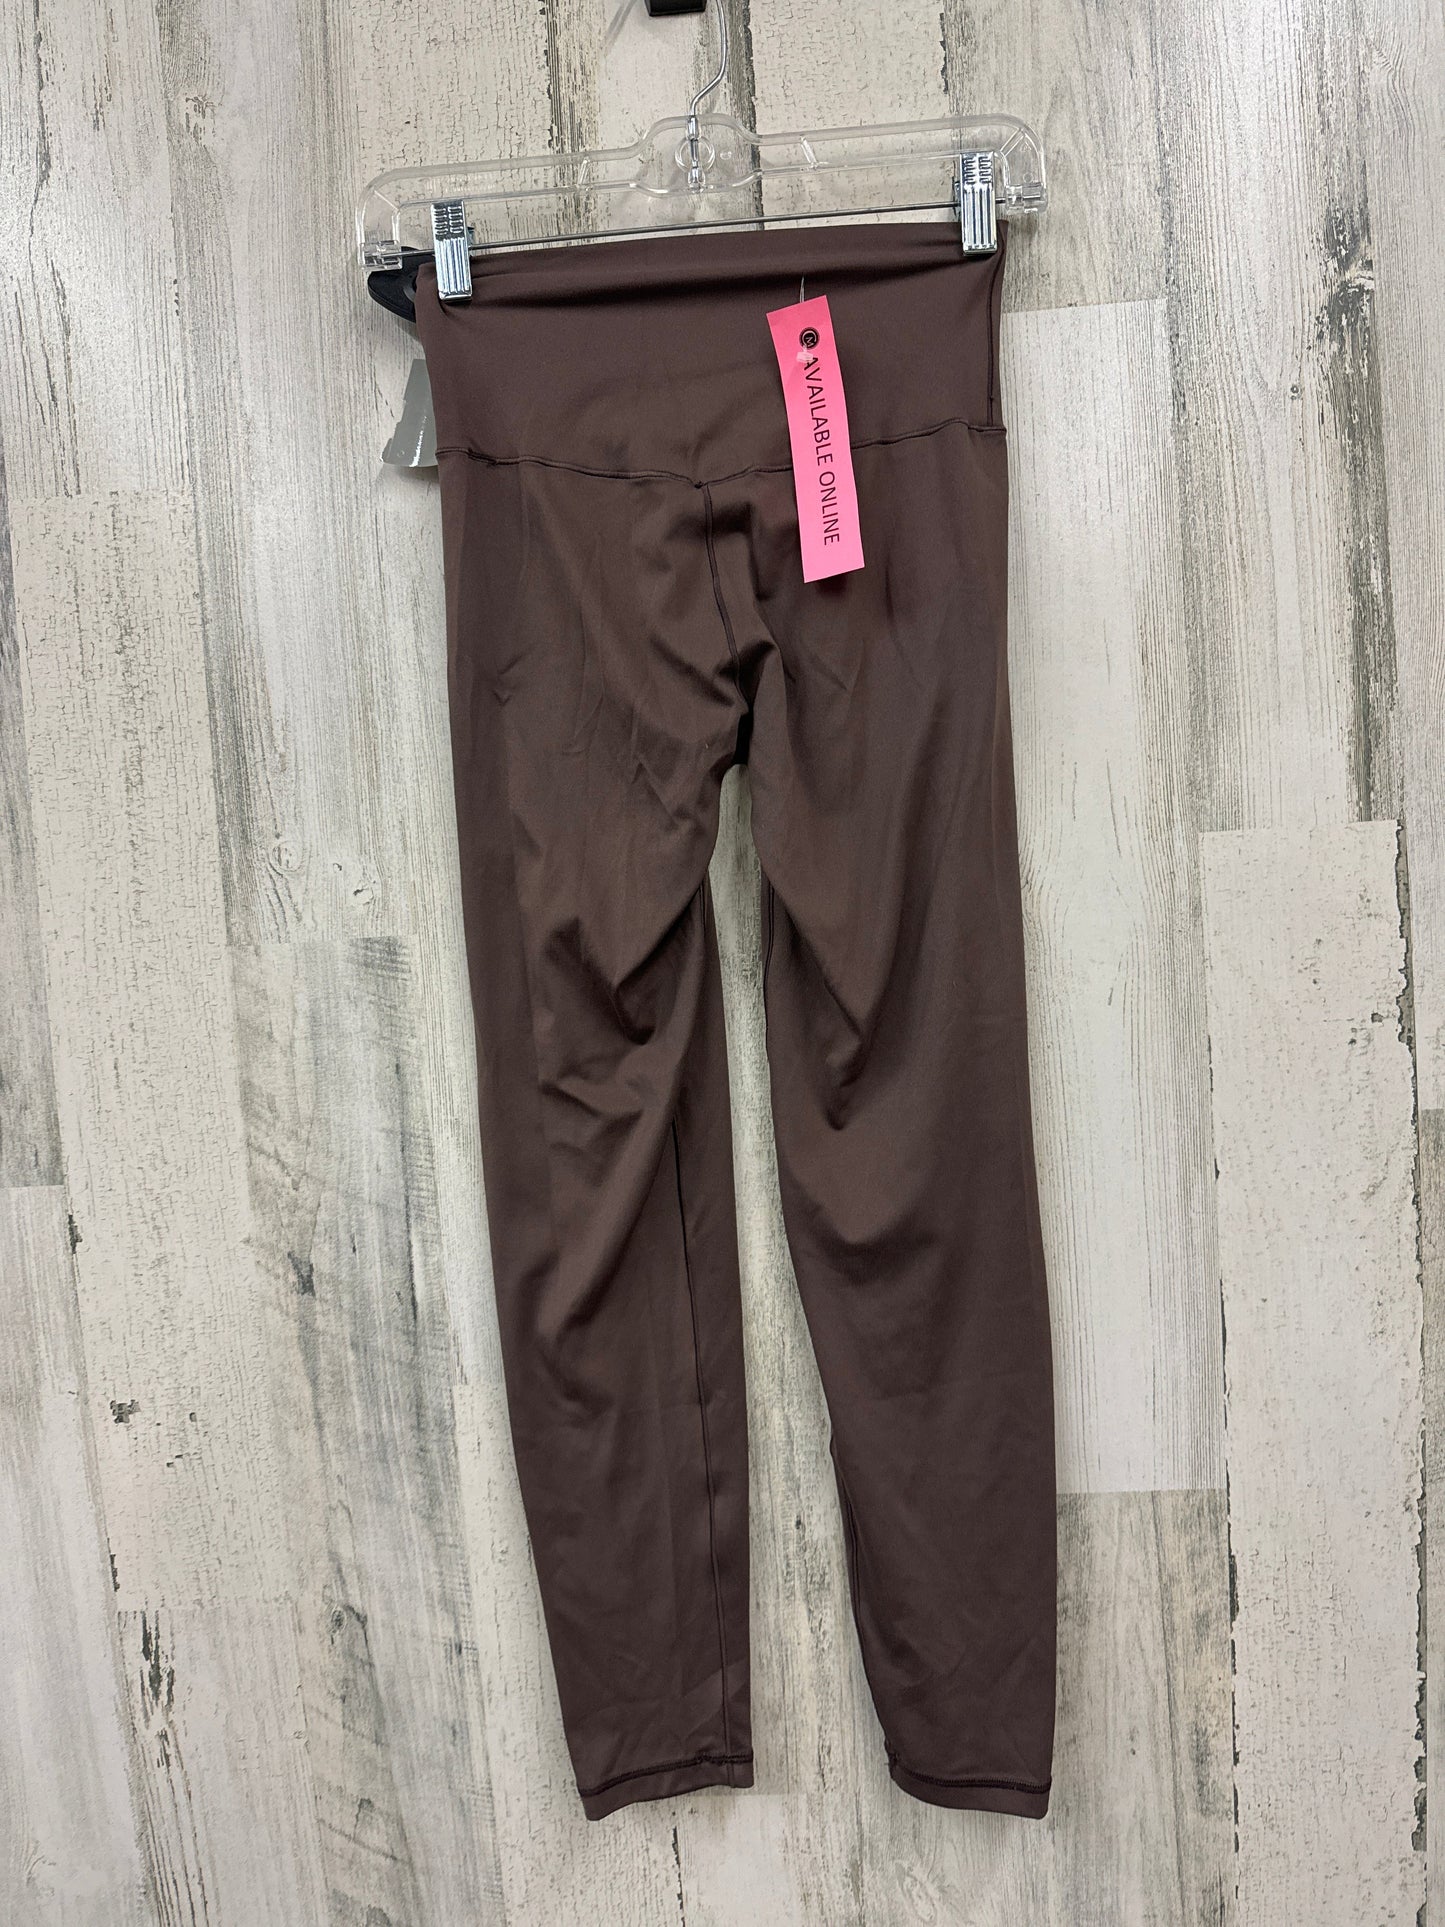 Pants Leggings By Aerie  Size: S